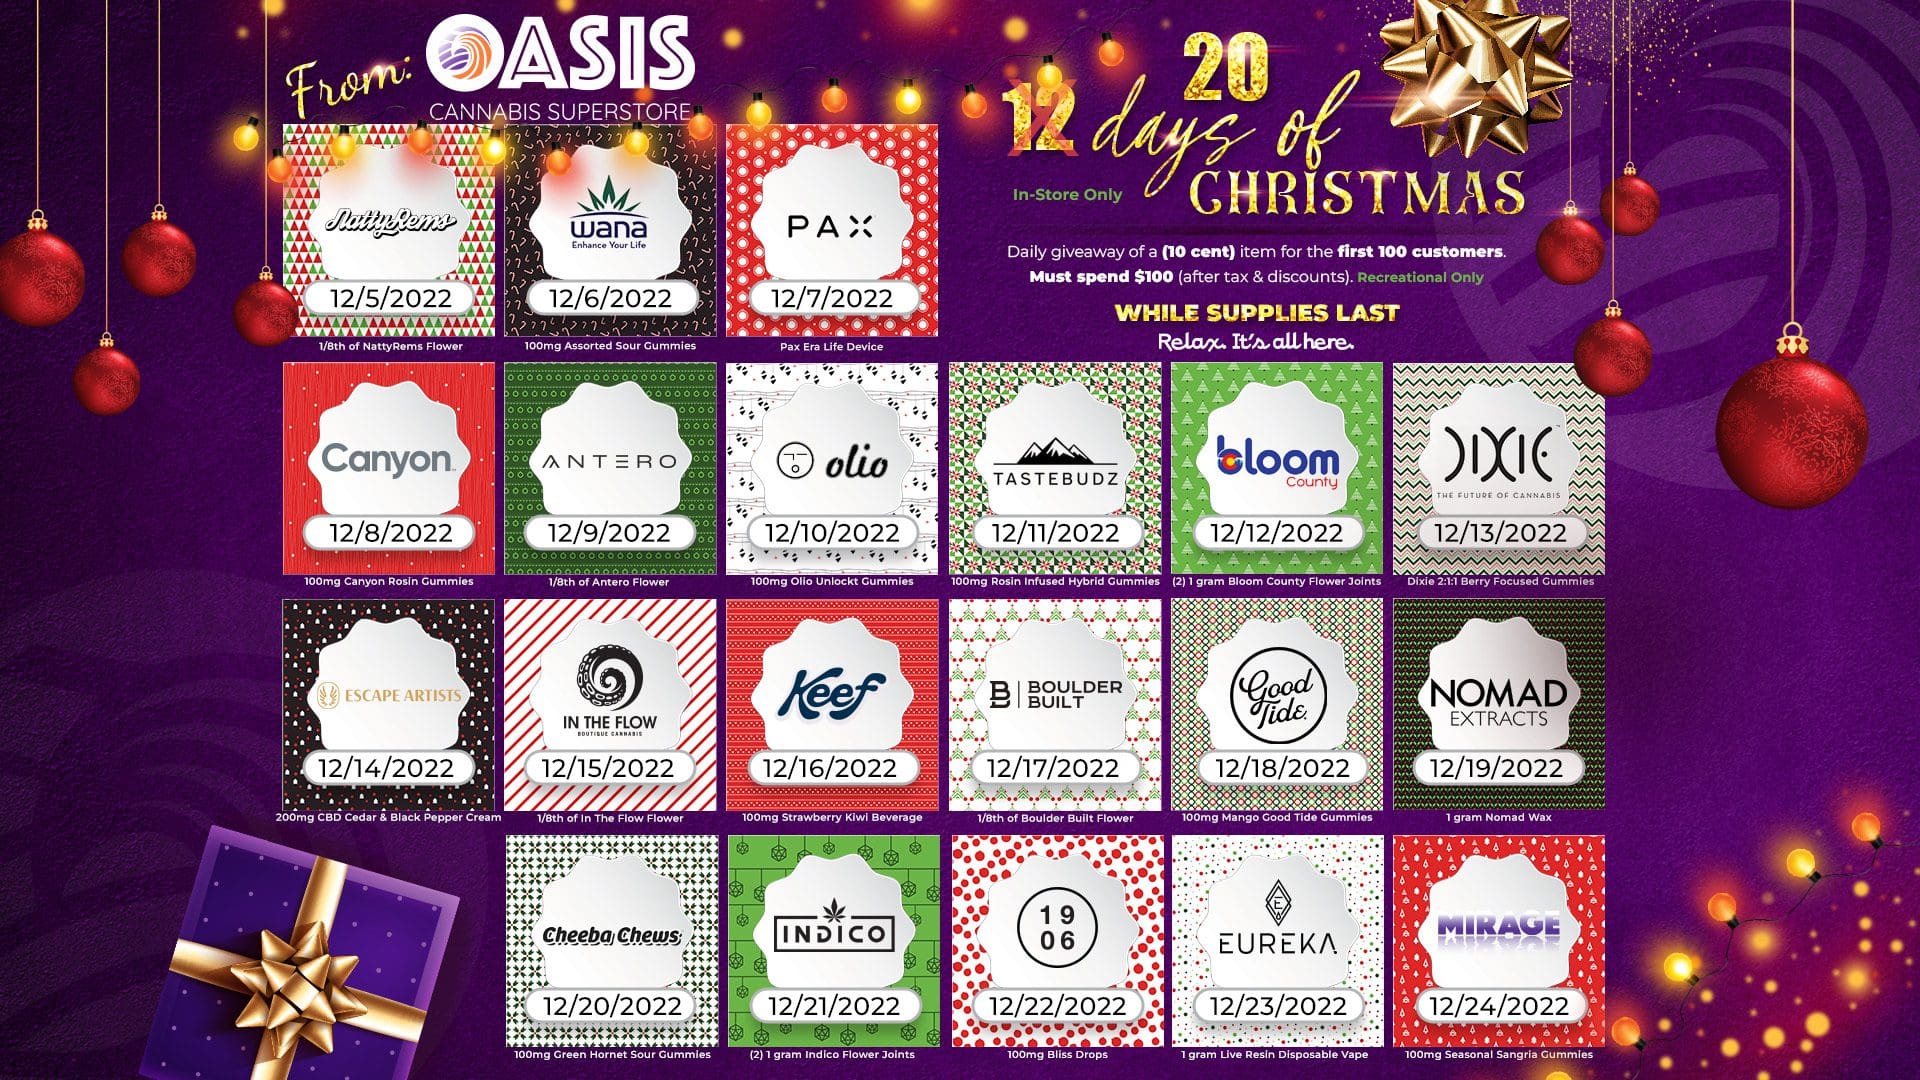 20 days of Christmas deals. A different daily deal. In-store only. Daily giveaways with purchase.